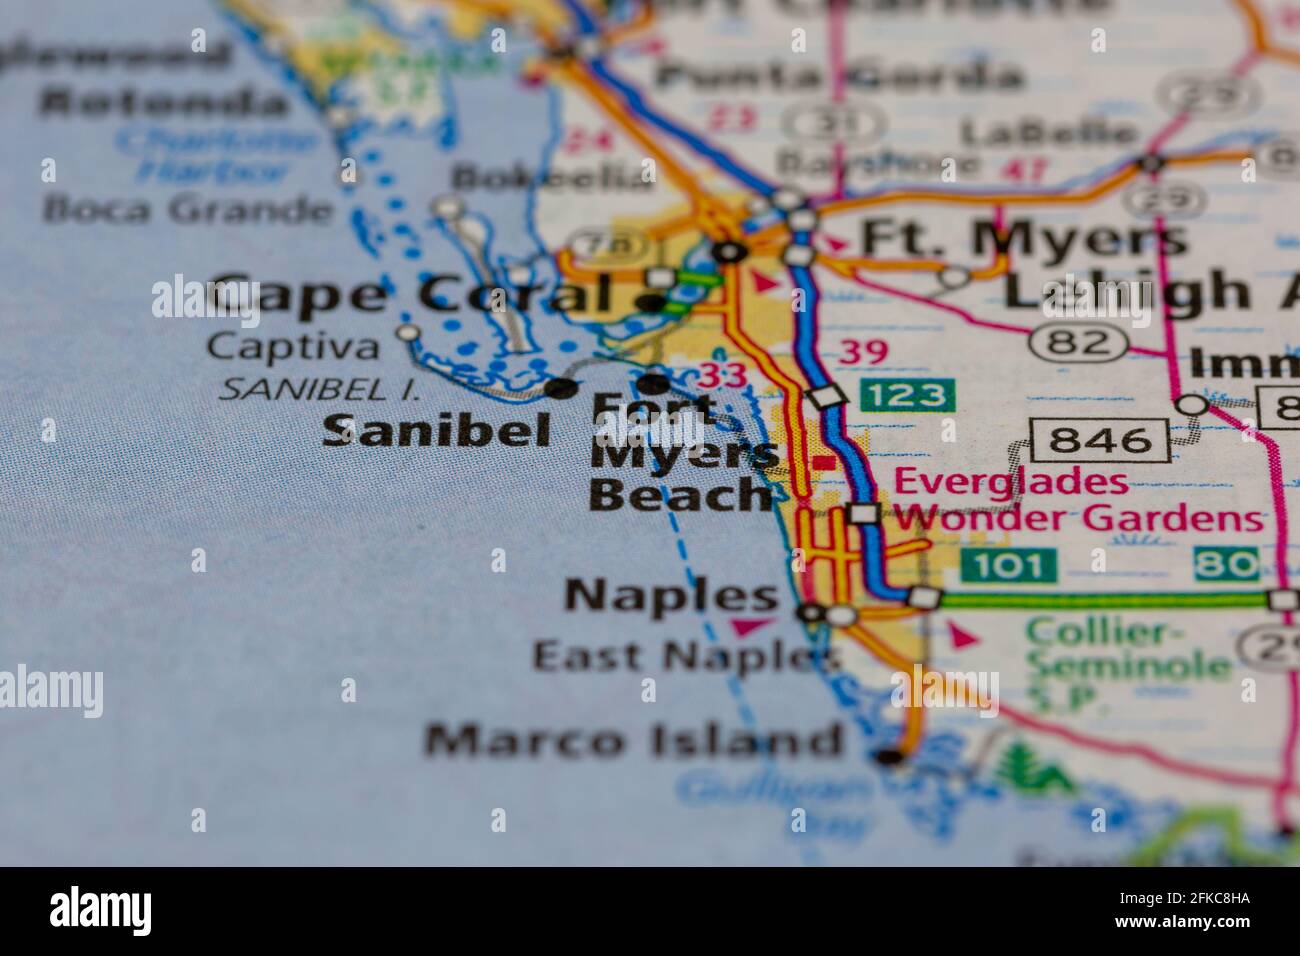 Fort Myers Beach Florida USA Shown on a geography map or road map Stock Photo